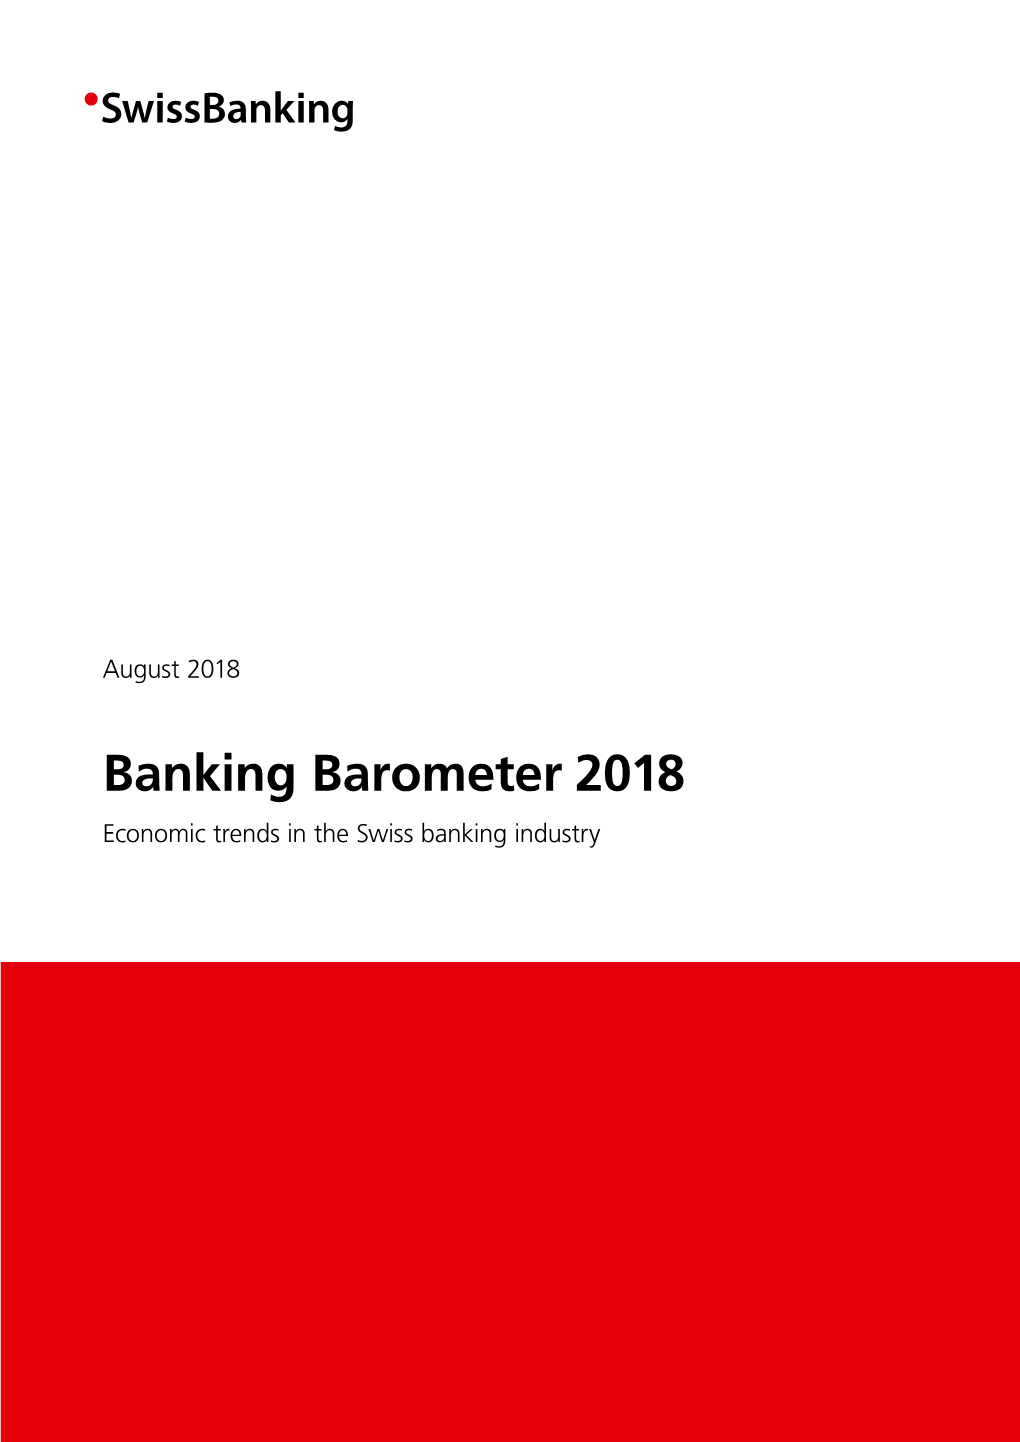 Banking Barometer 2018 Economic Trends in the Swiss Banking Industry